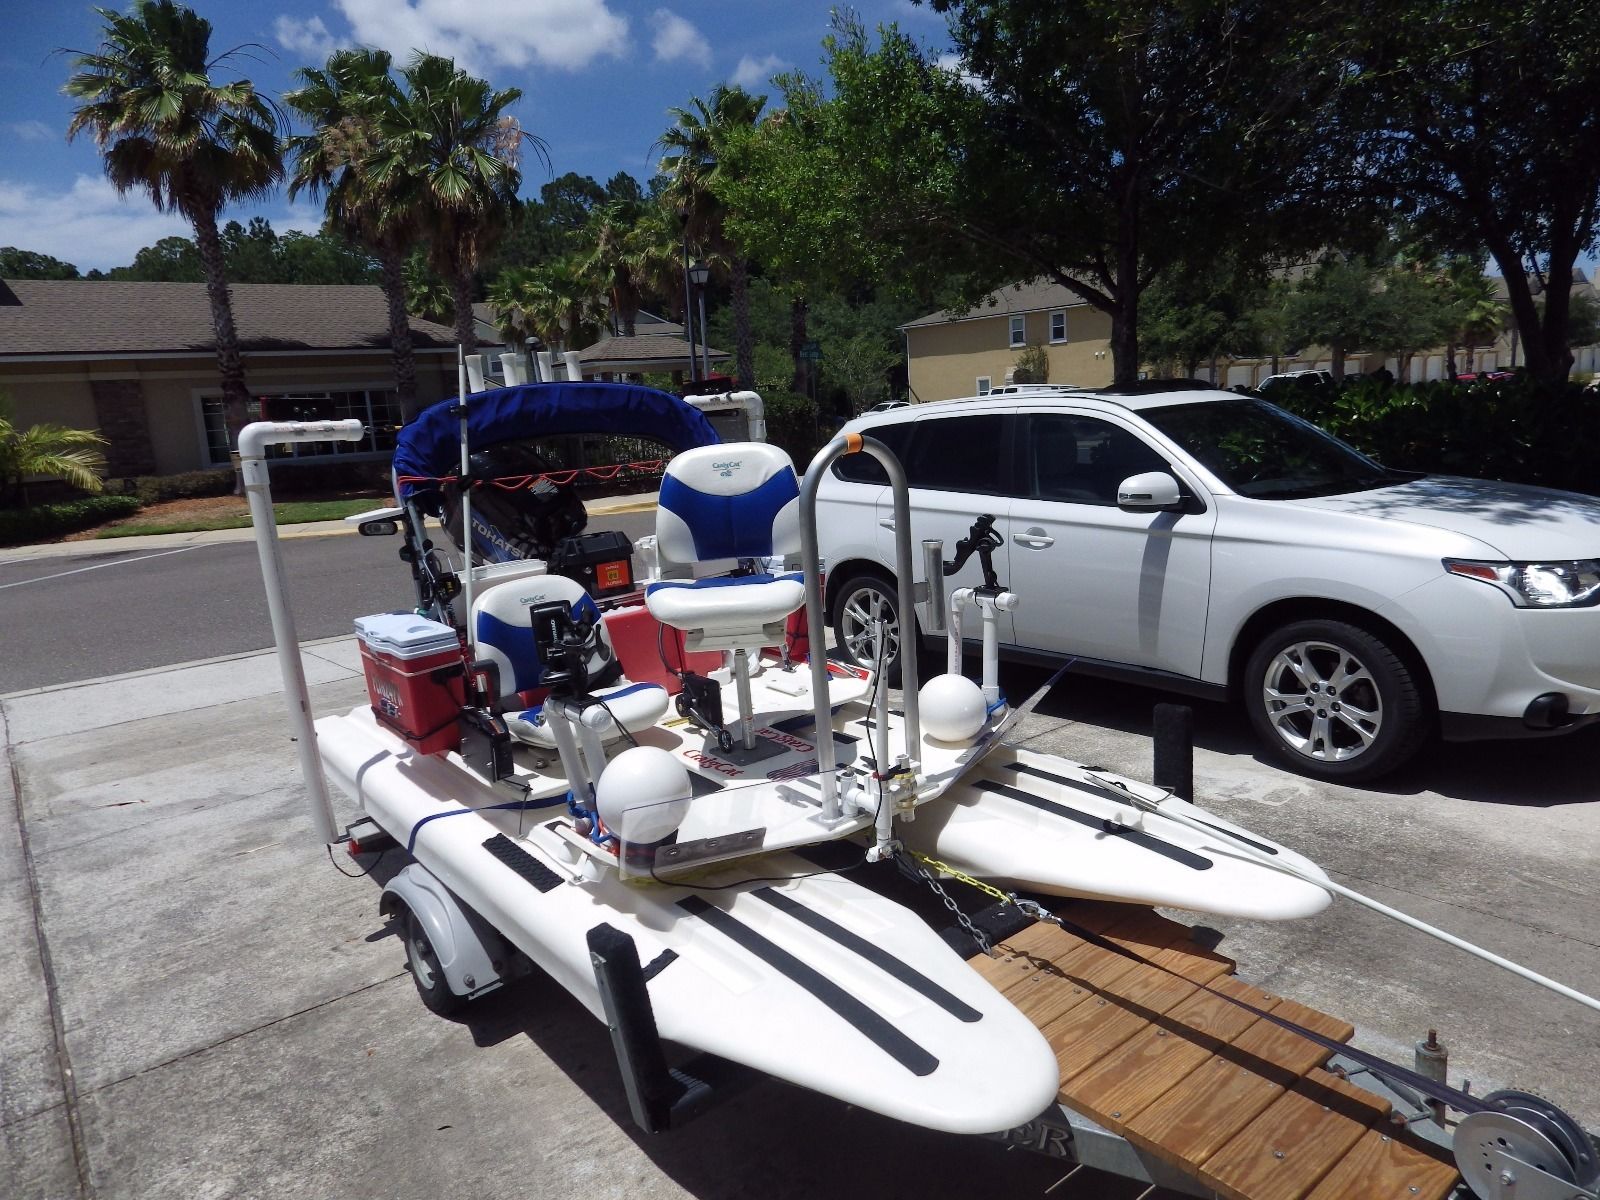 Craigcat 2008 for sale for $5,300 - Boats-from-USA.com